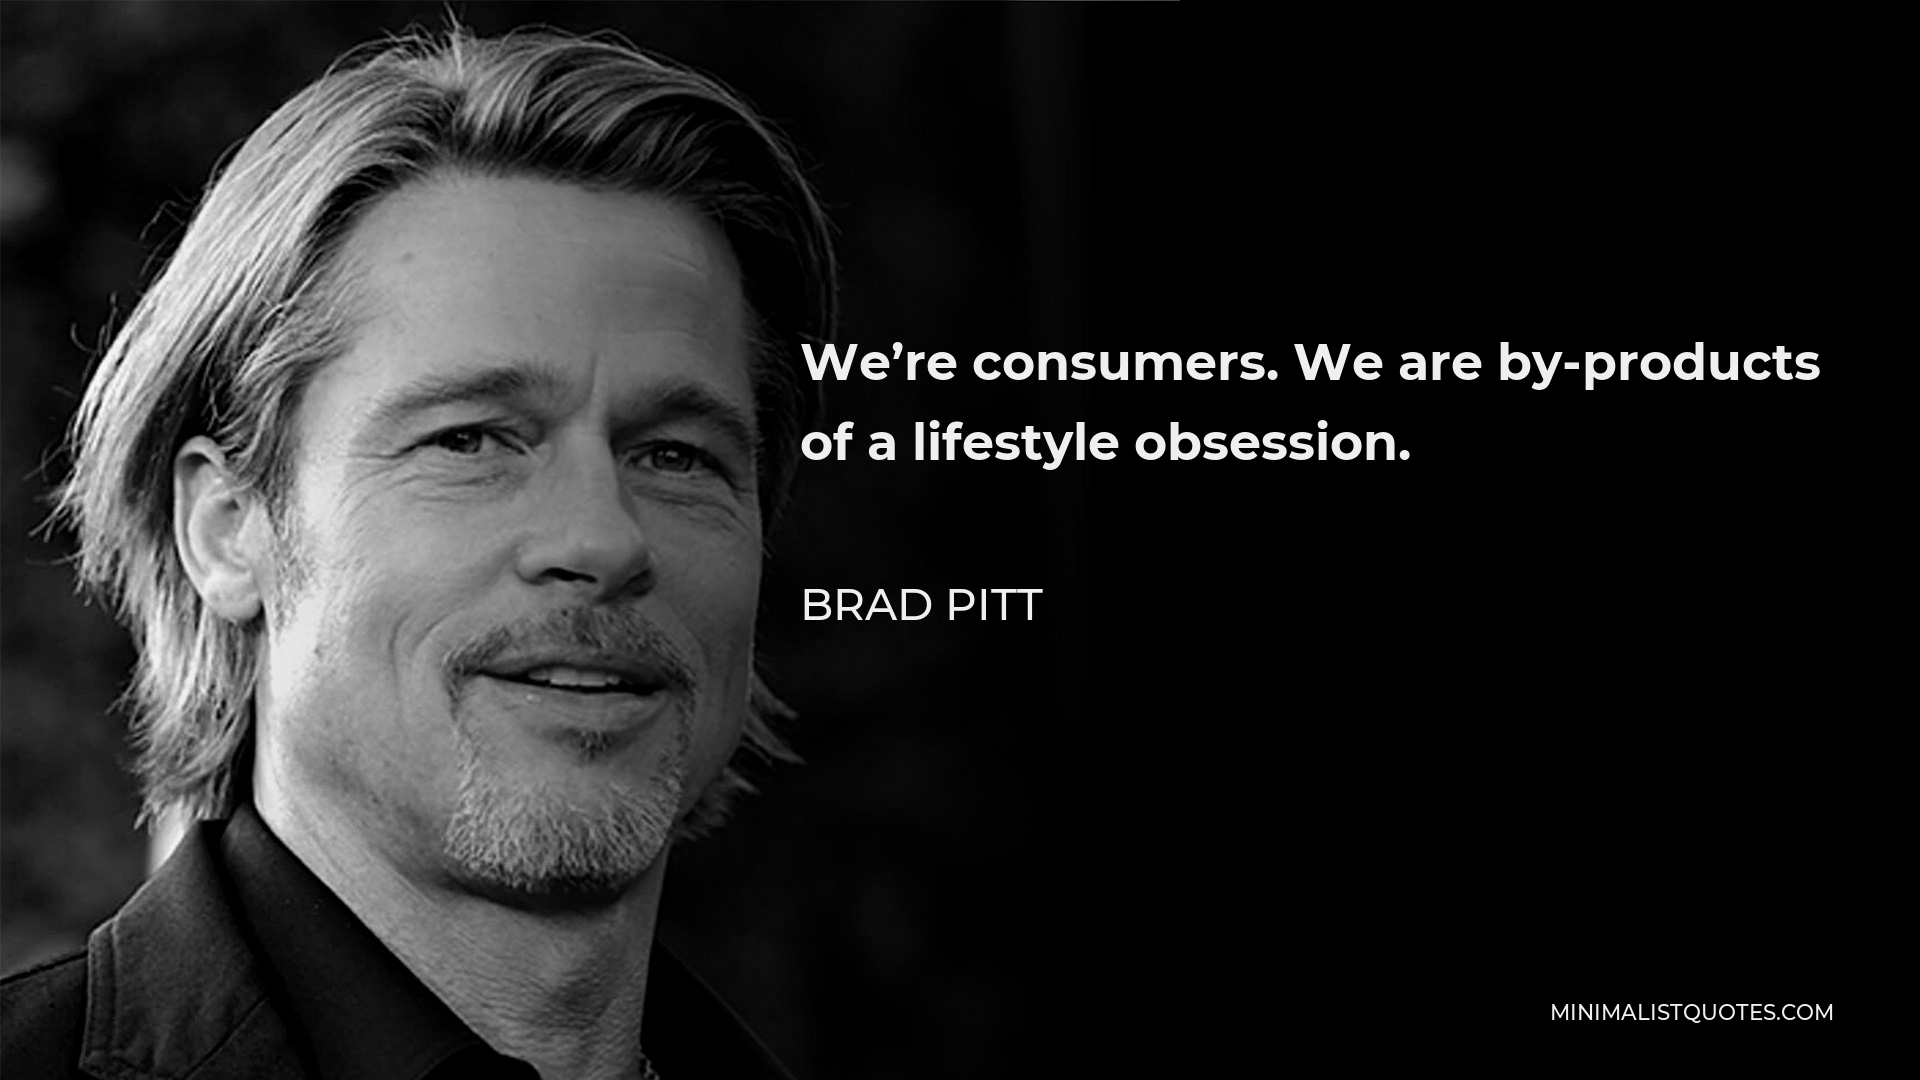 Brad Pitt Quote - We’re consumers. We are by-products of a lifestyle obsession.